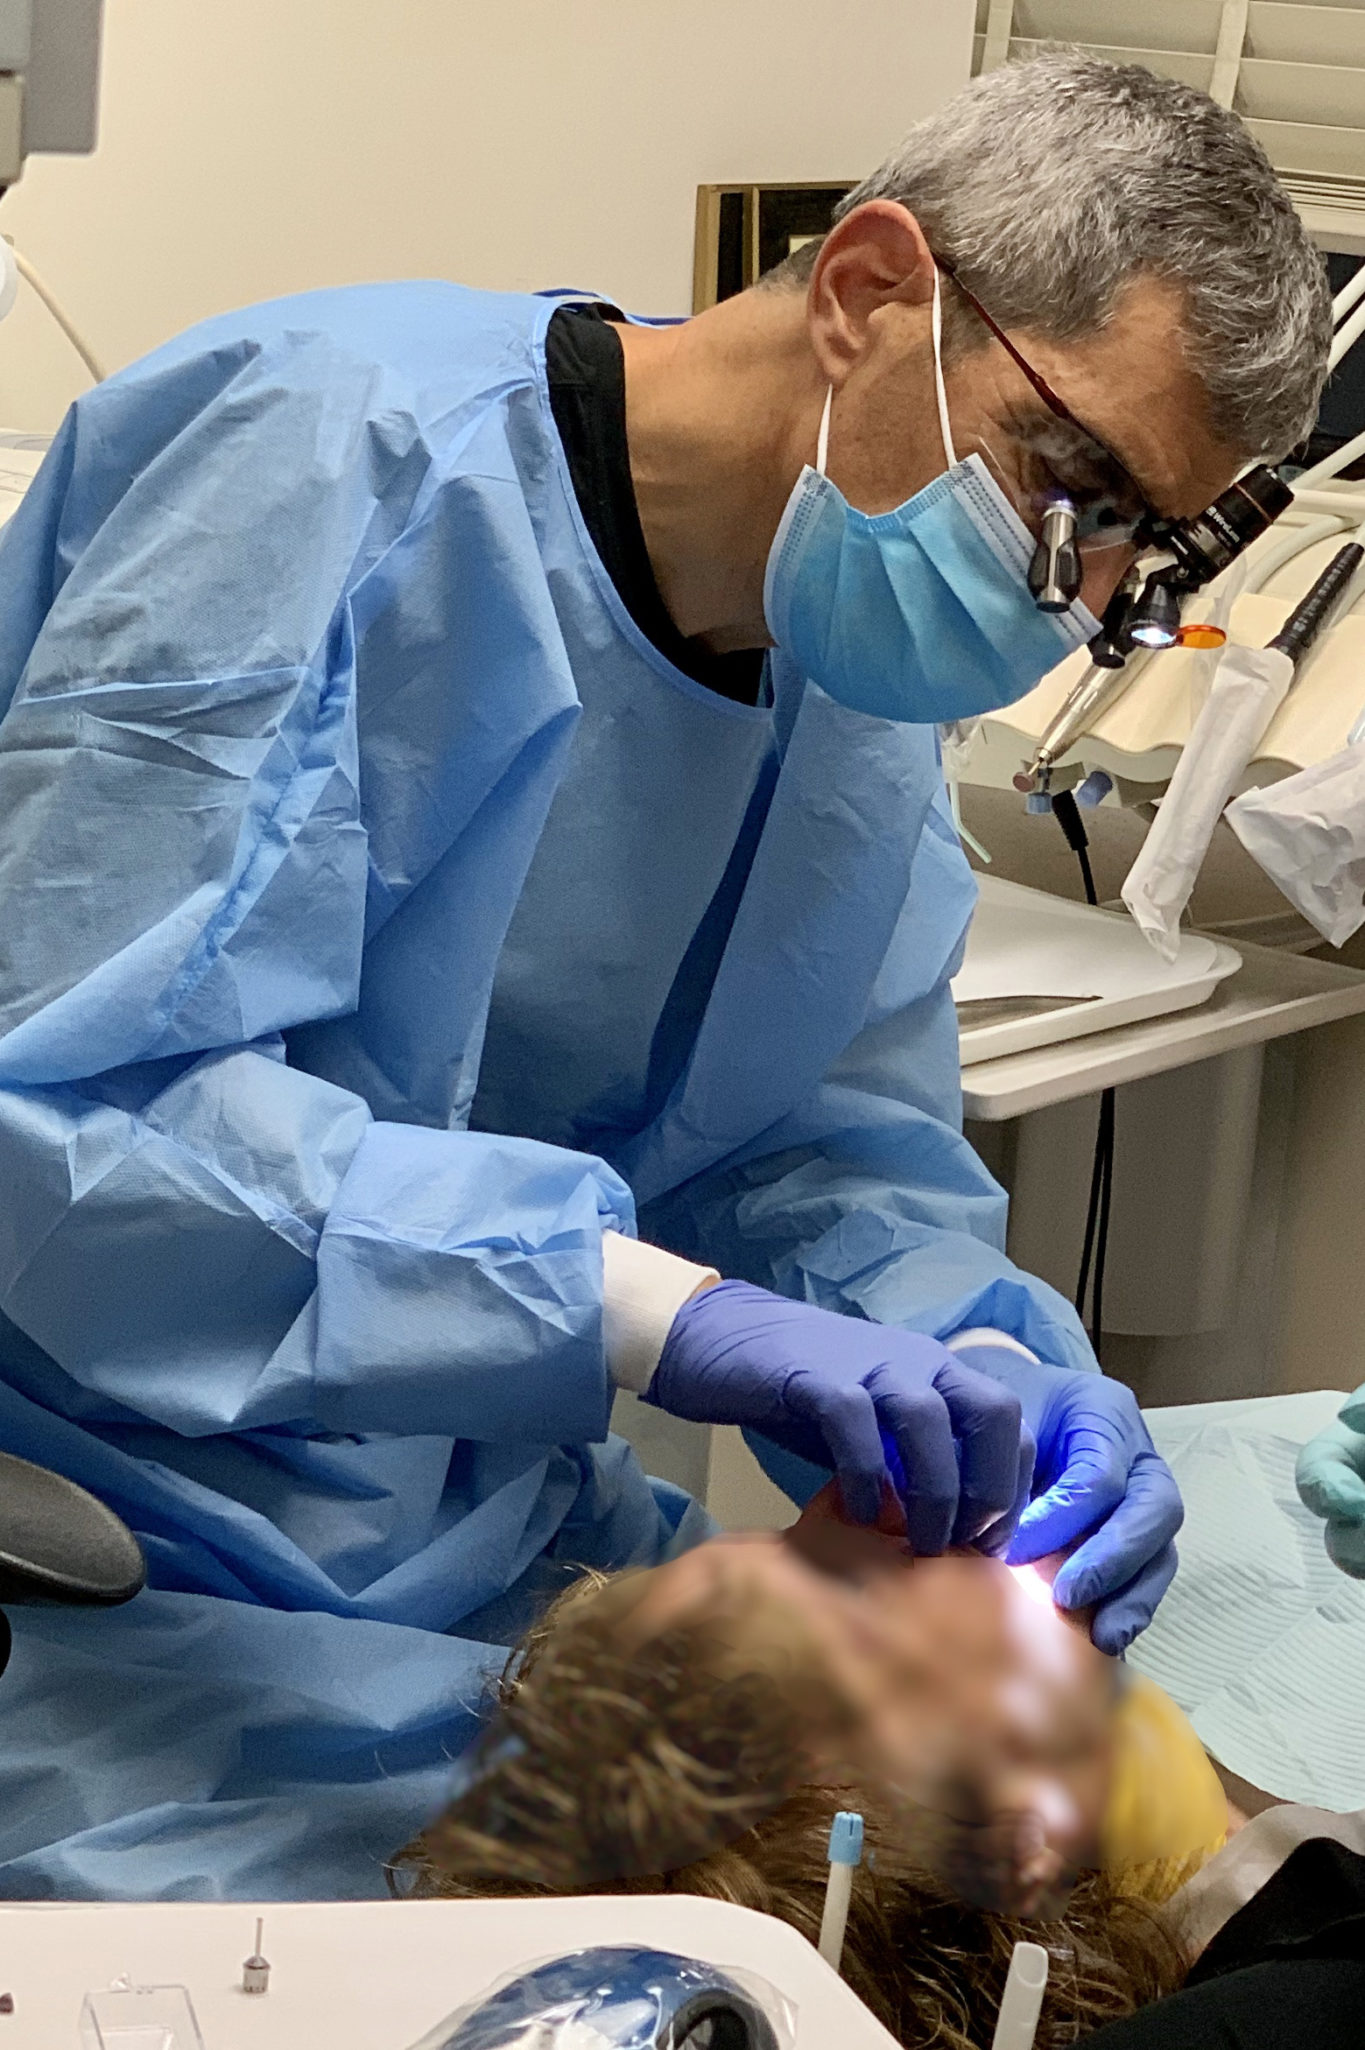 Dr. Andy placing minimally invasive implant into patient's mouth